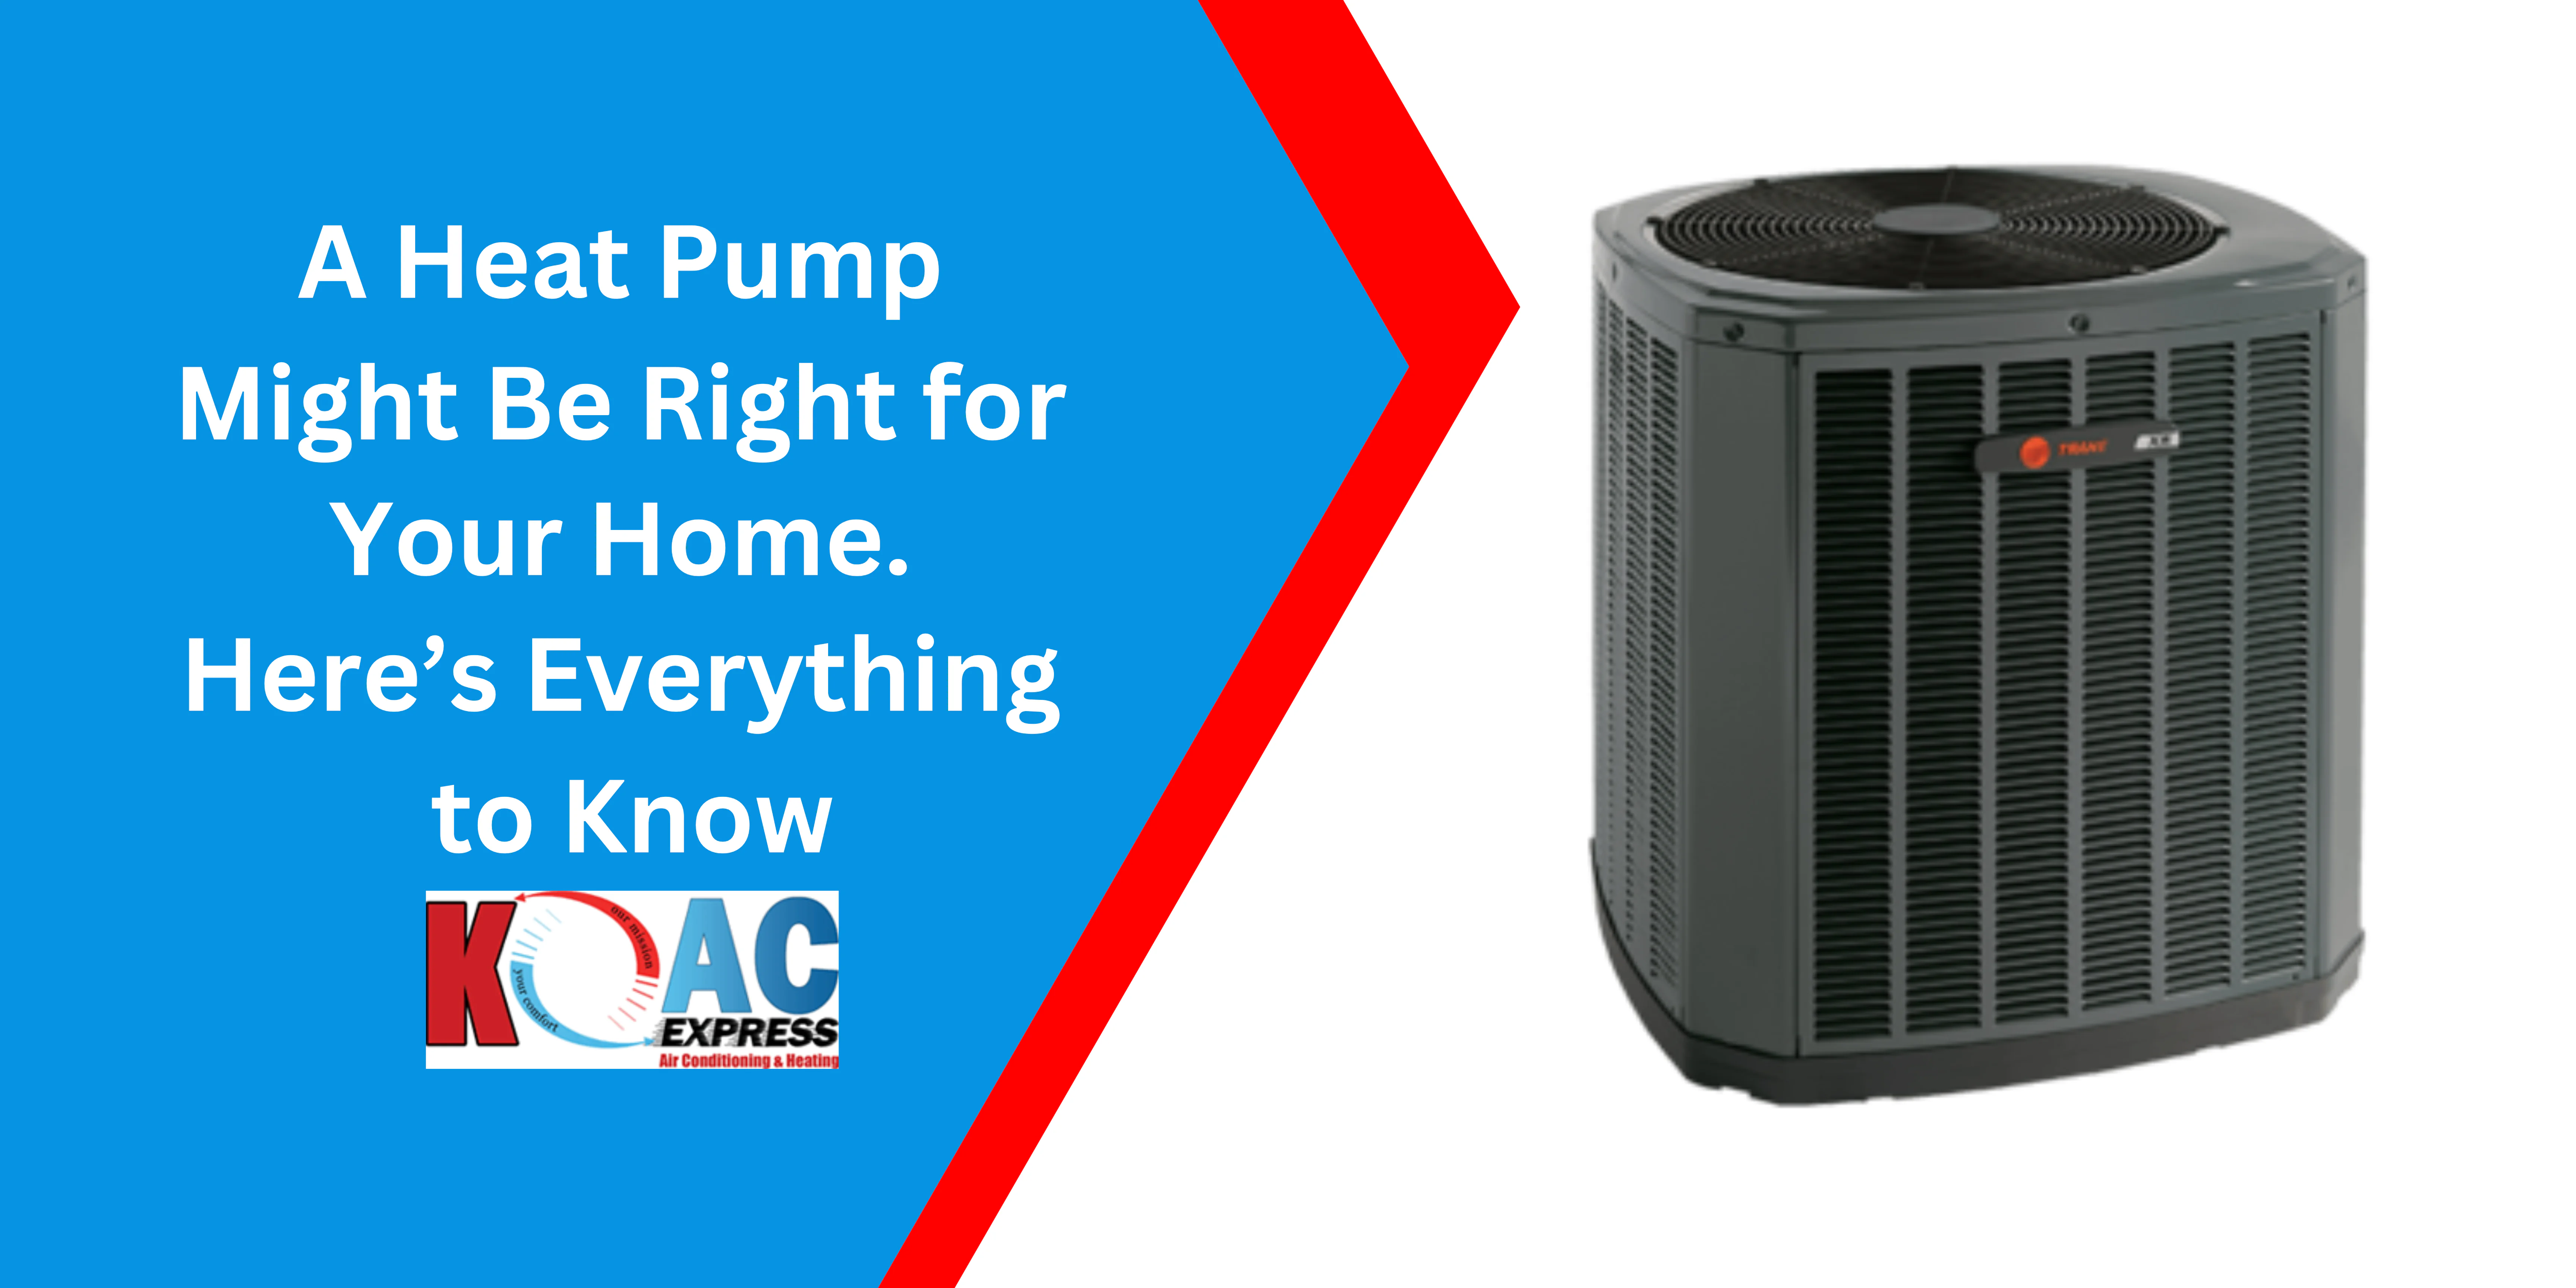 A Heat Pump Might Be Right for Your Home. Here’s Everything to Know